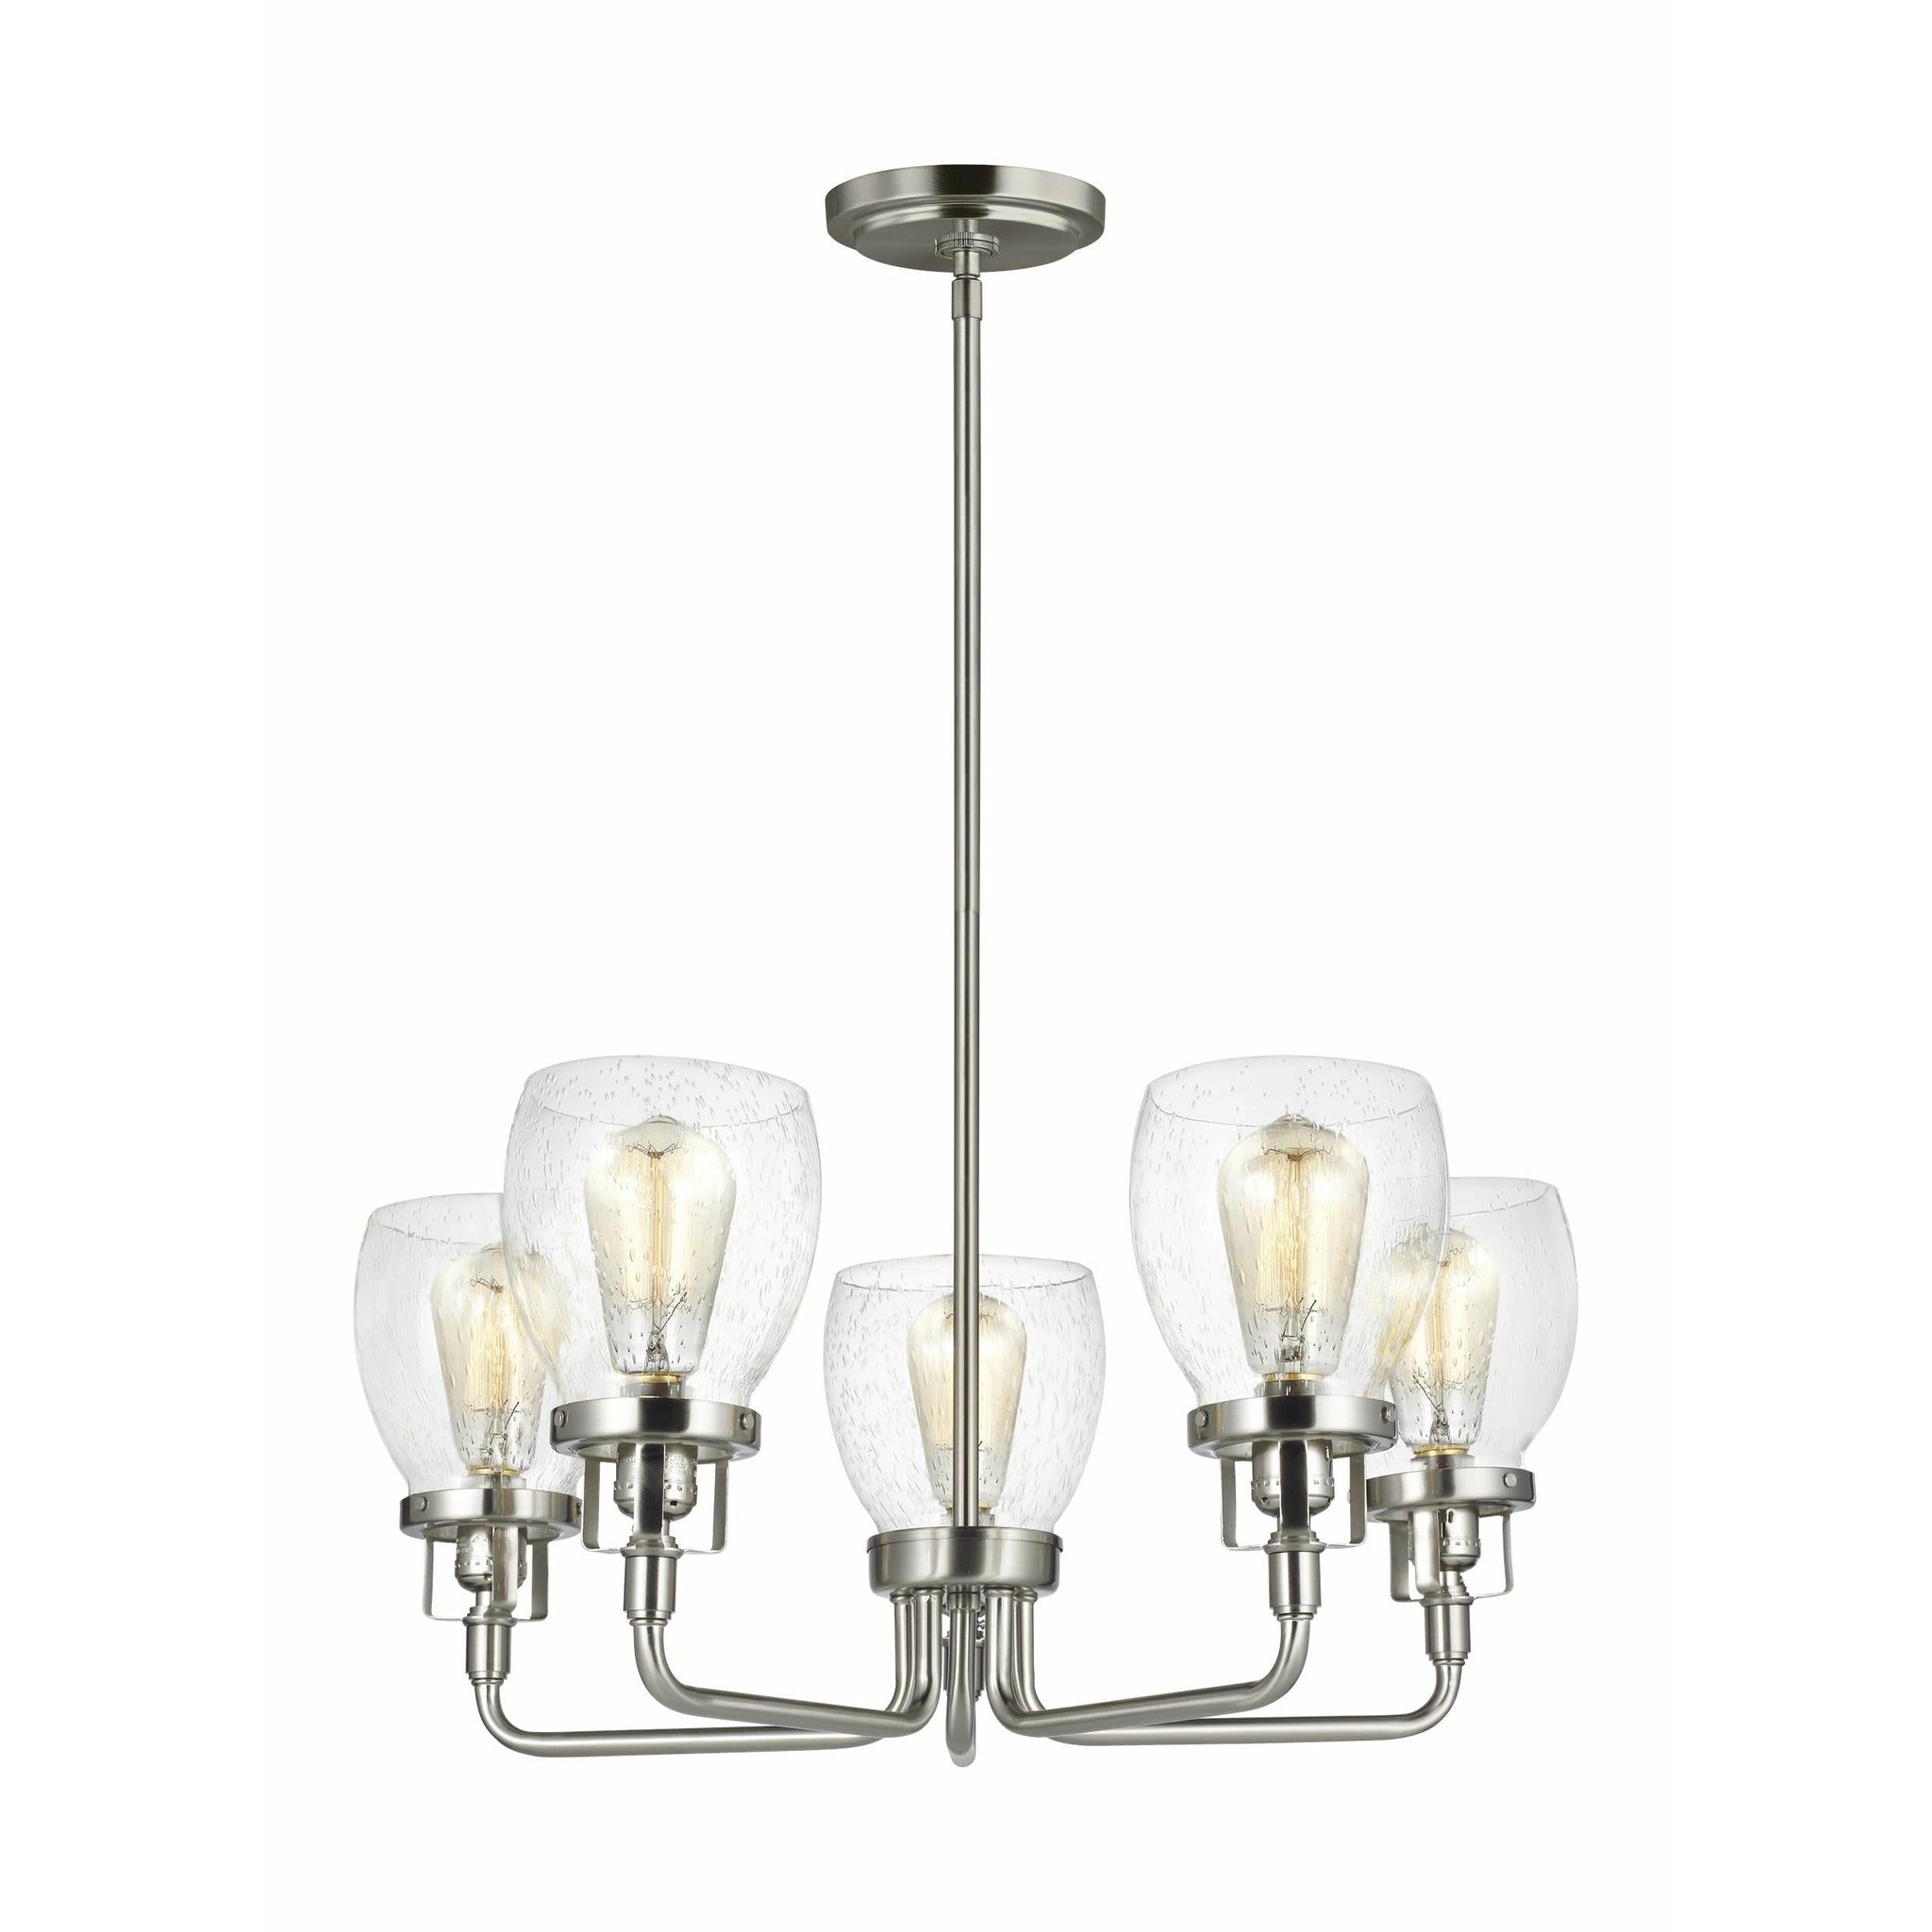 Belton 5-Light Up Chandelier (with Bulbs)